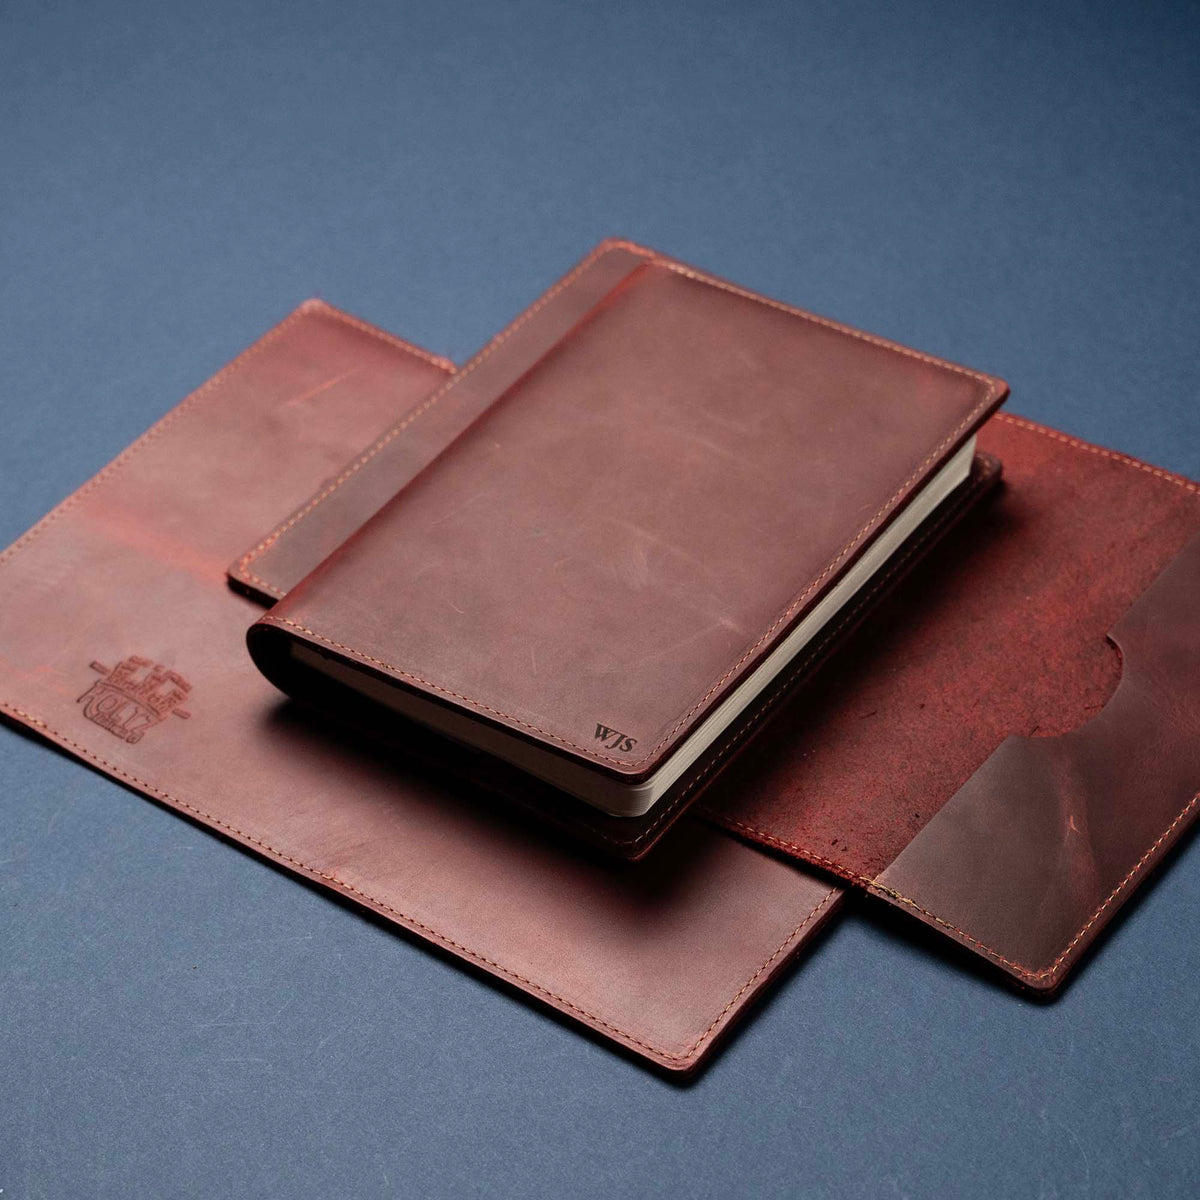 Red Cowhide - A5 Leather Journal - Personalized High Character (One-Of-A-Kind) Notebooks - 192 pages 8.75” x 6.25”